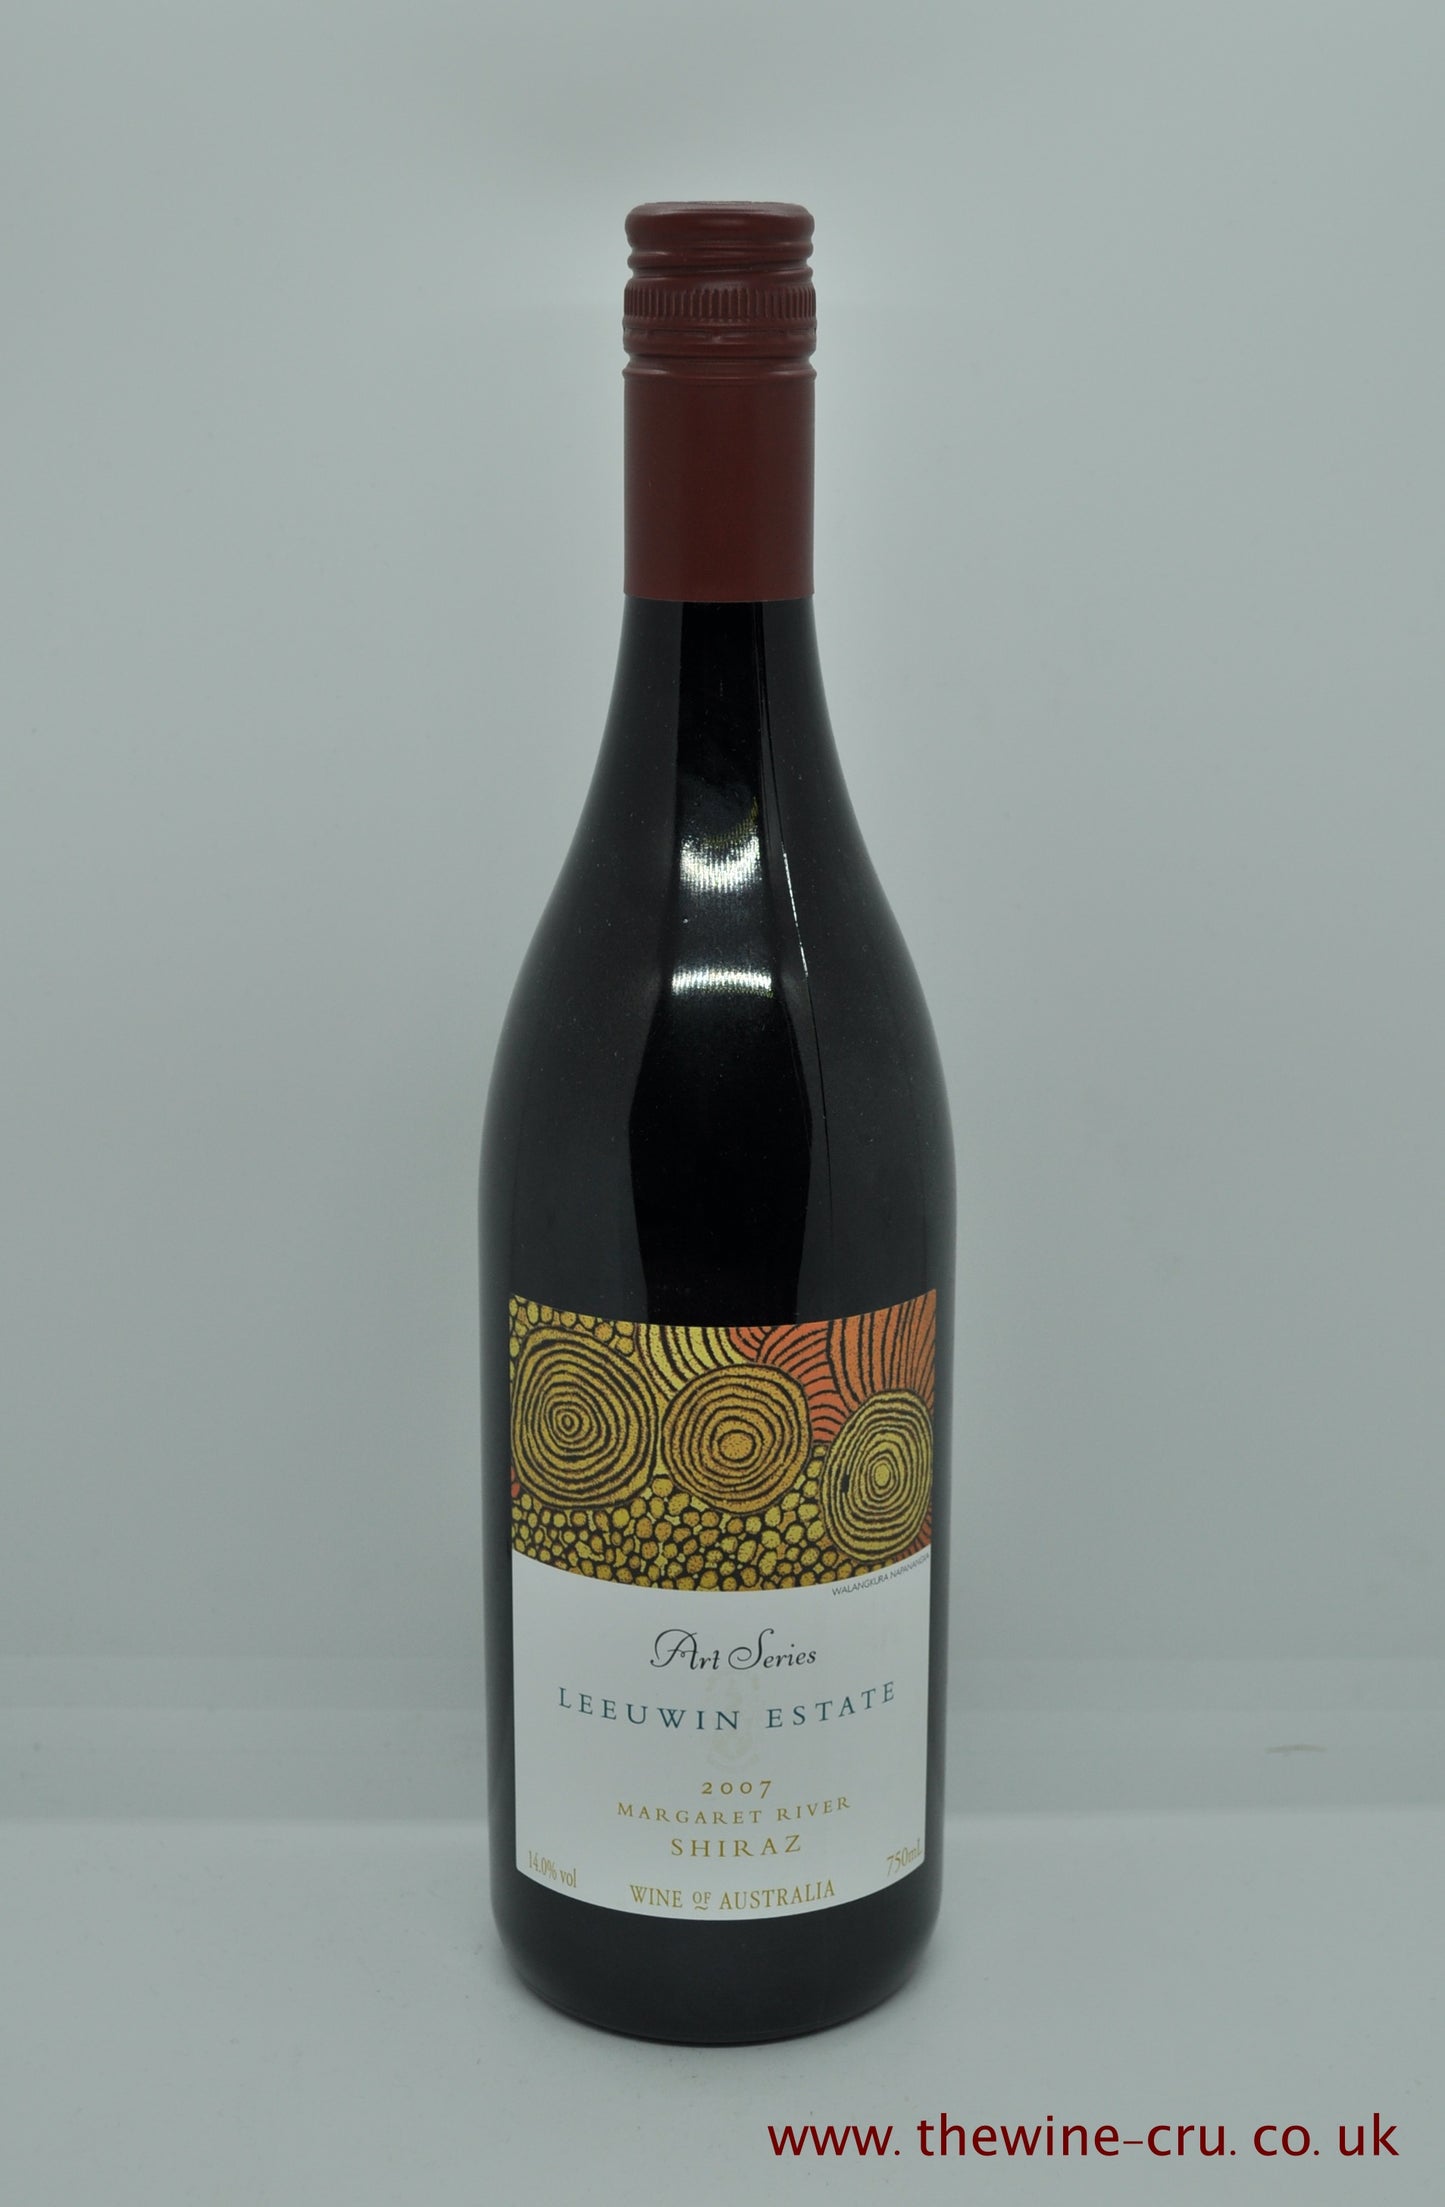 2007 vintage red wine. Leeuwin Art Series Margaret River Shiraz 2007. Australia. The bottles are in excellent condition. Immediate delivery. Free local delivery. Gift wrapping available.